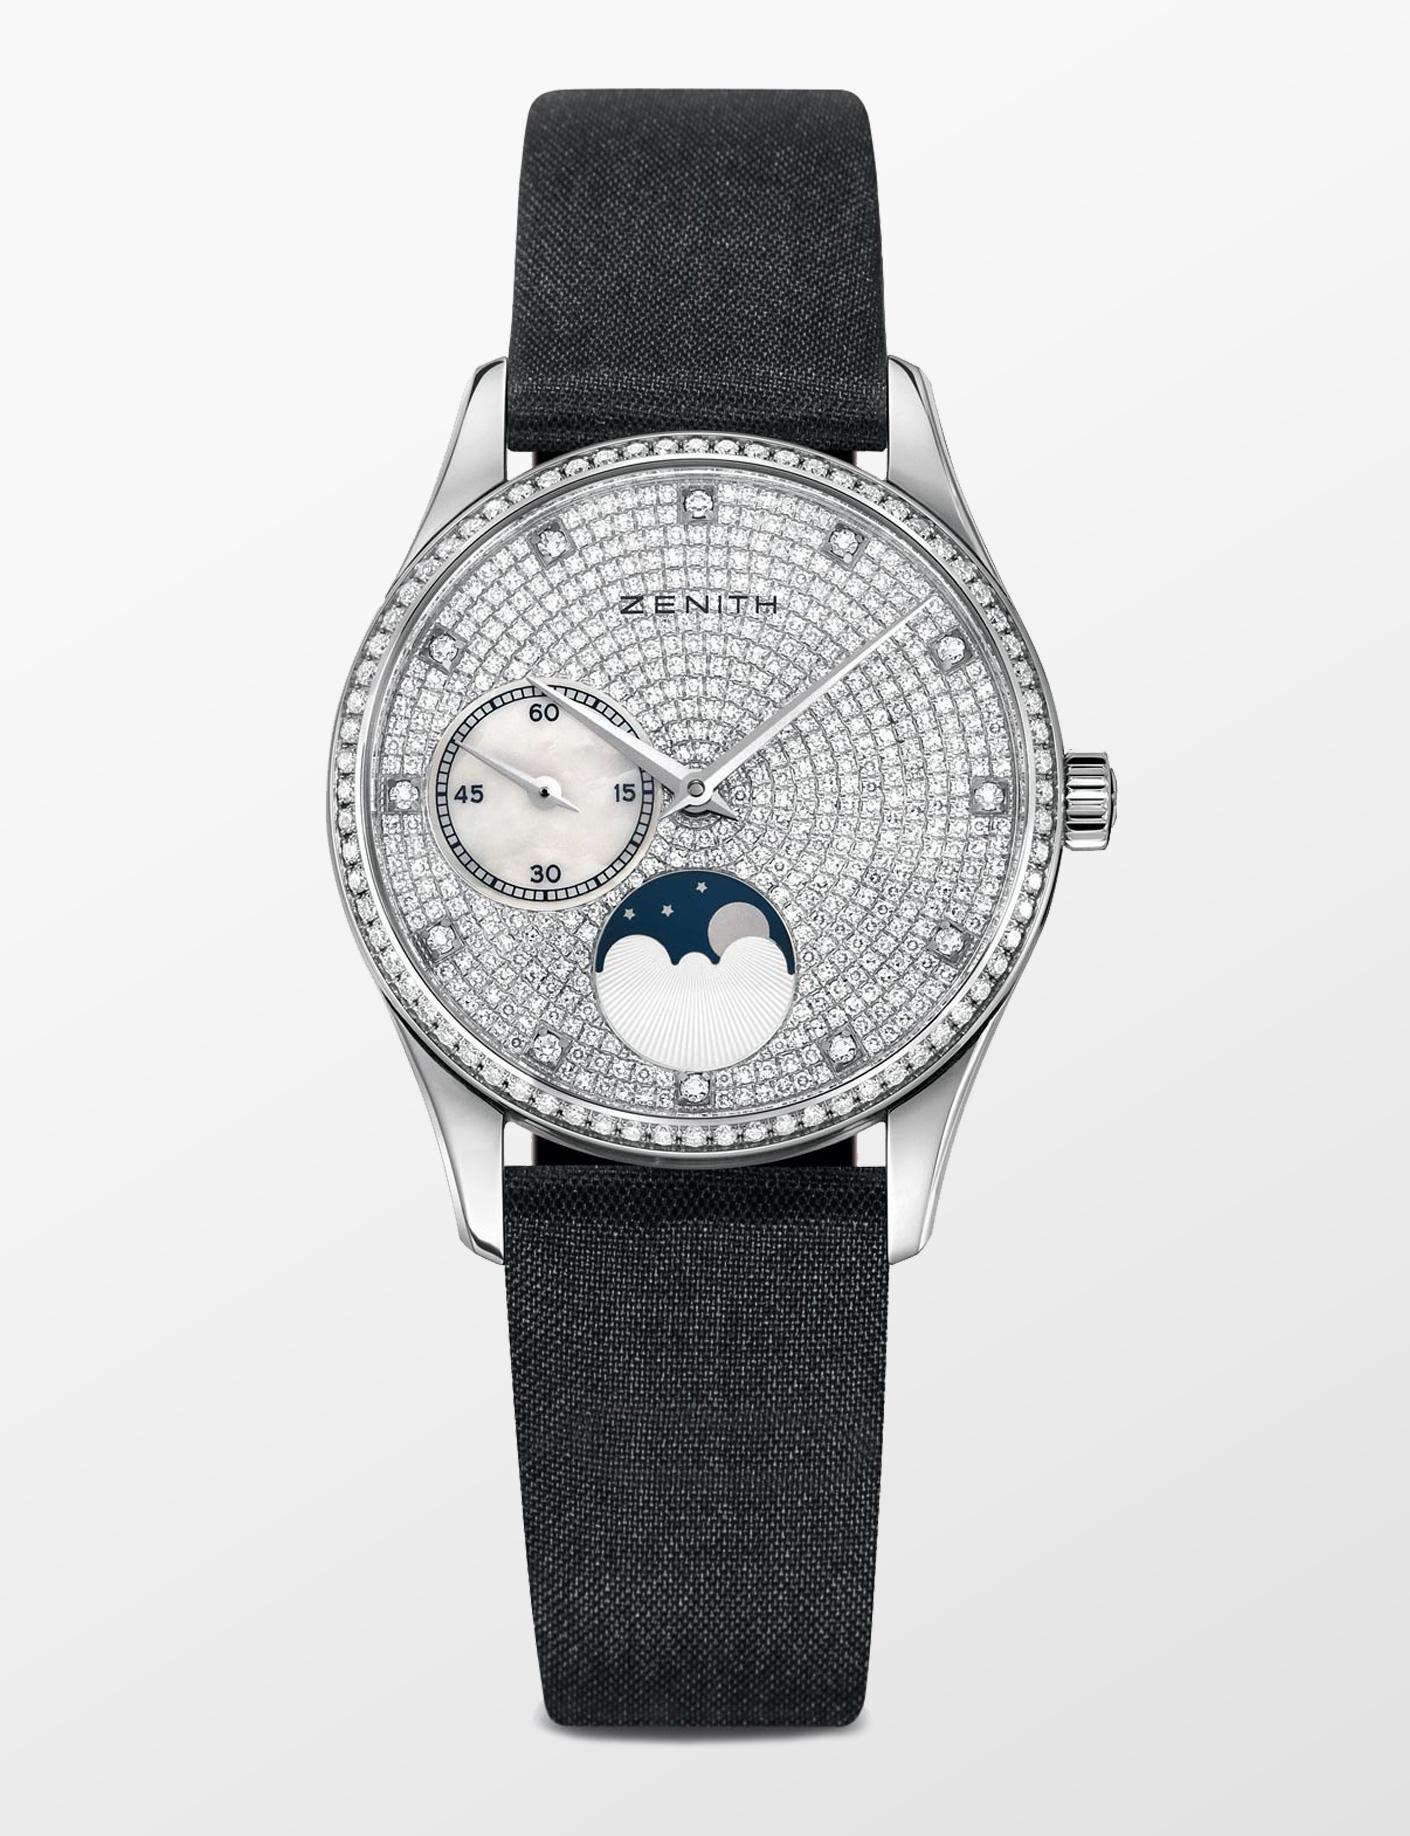 Elite Lady Ultra Thin Moonphase in White Gold with Diamond Bezel on Black Satin Strap with Pave Diamond Dial